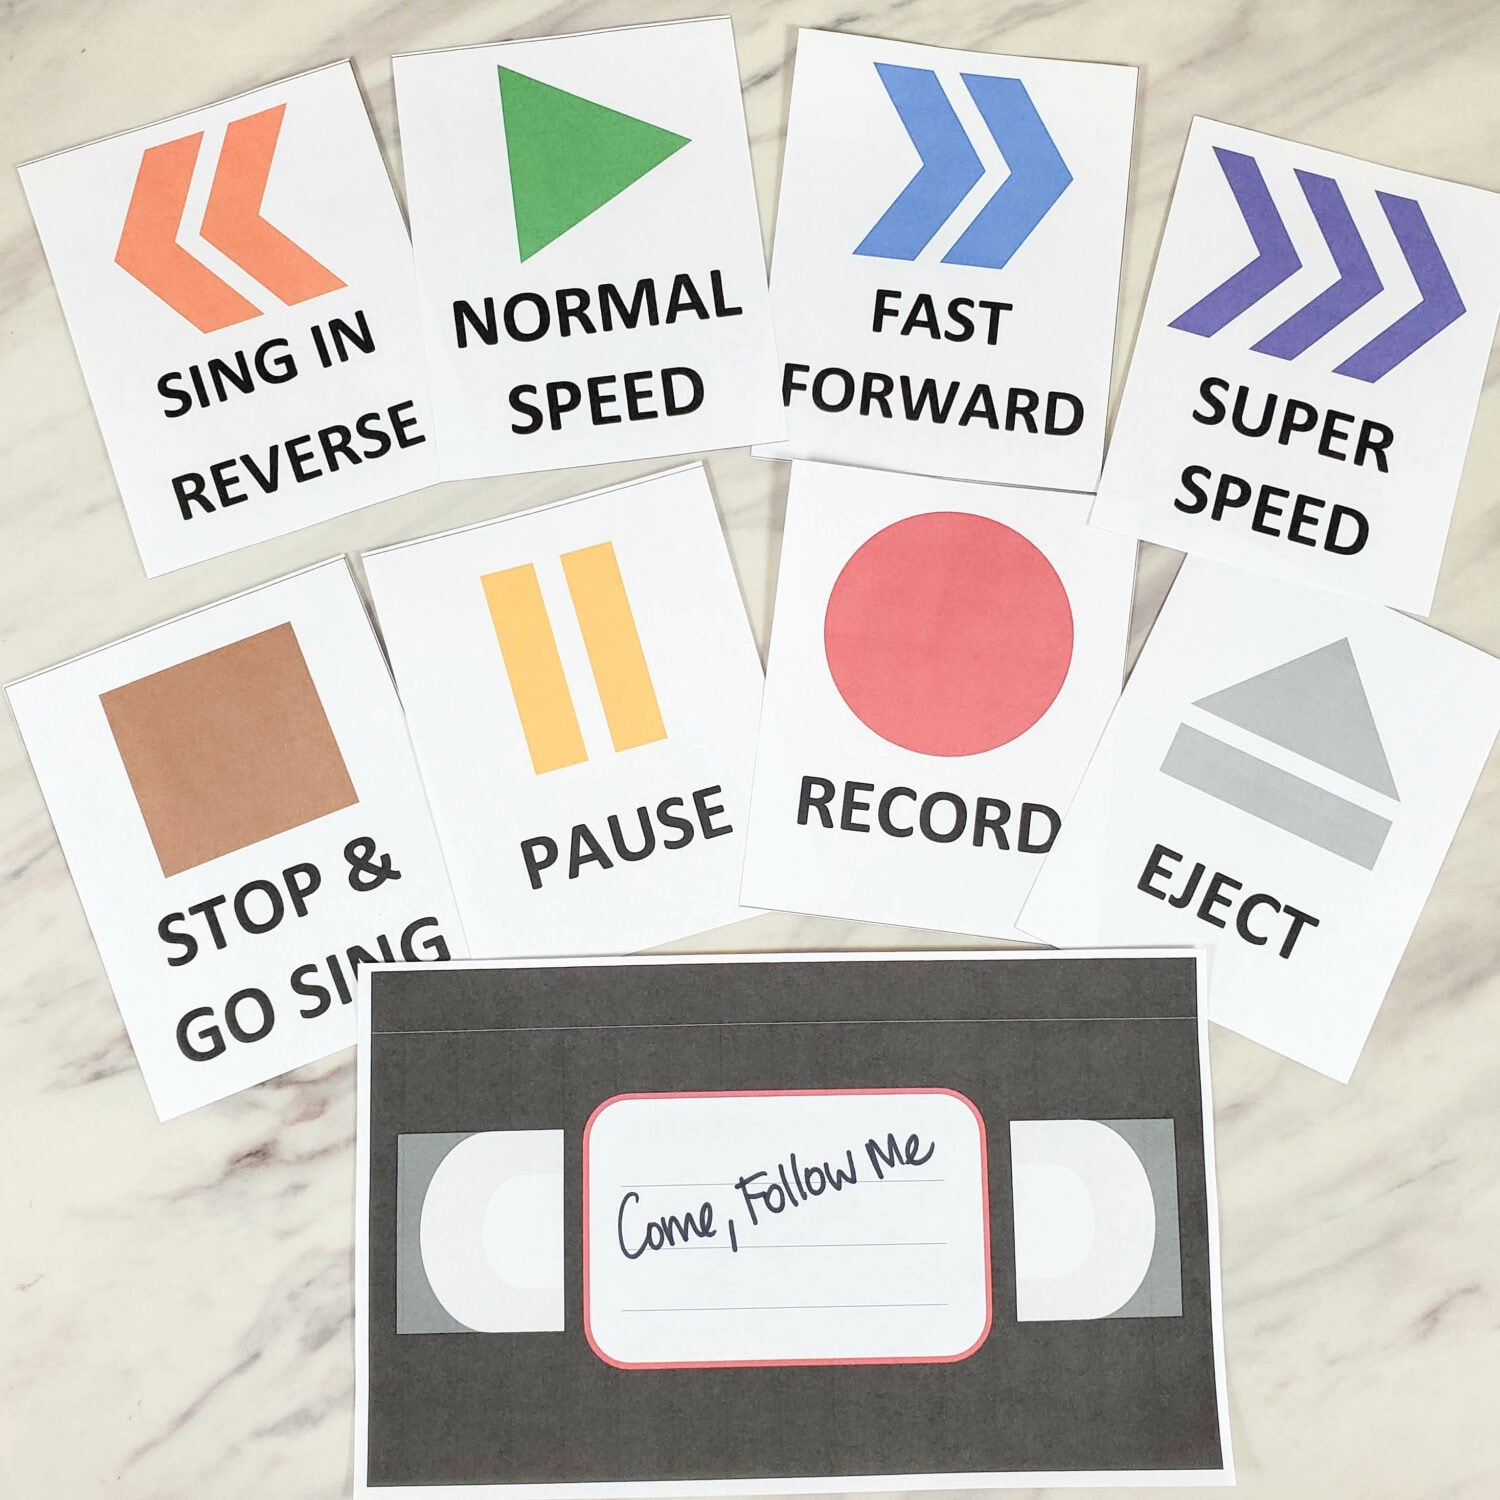 Cute Time of Your Life singing time idea and printables song helps for LDS Primary music leaders. It's a perfect theme to throw back to your favorite songs from the past or introduce new Primary songs at the beginning of the year with old VHS tapes and singing speed printable cards.